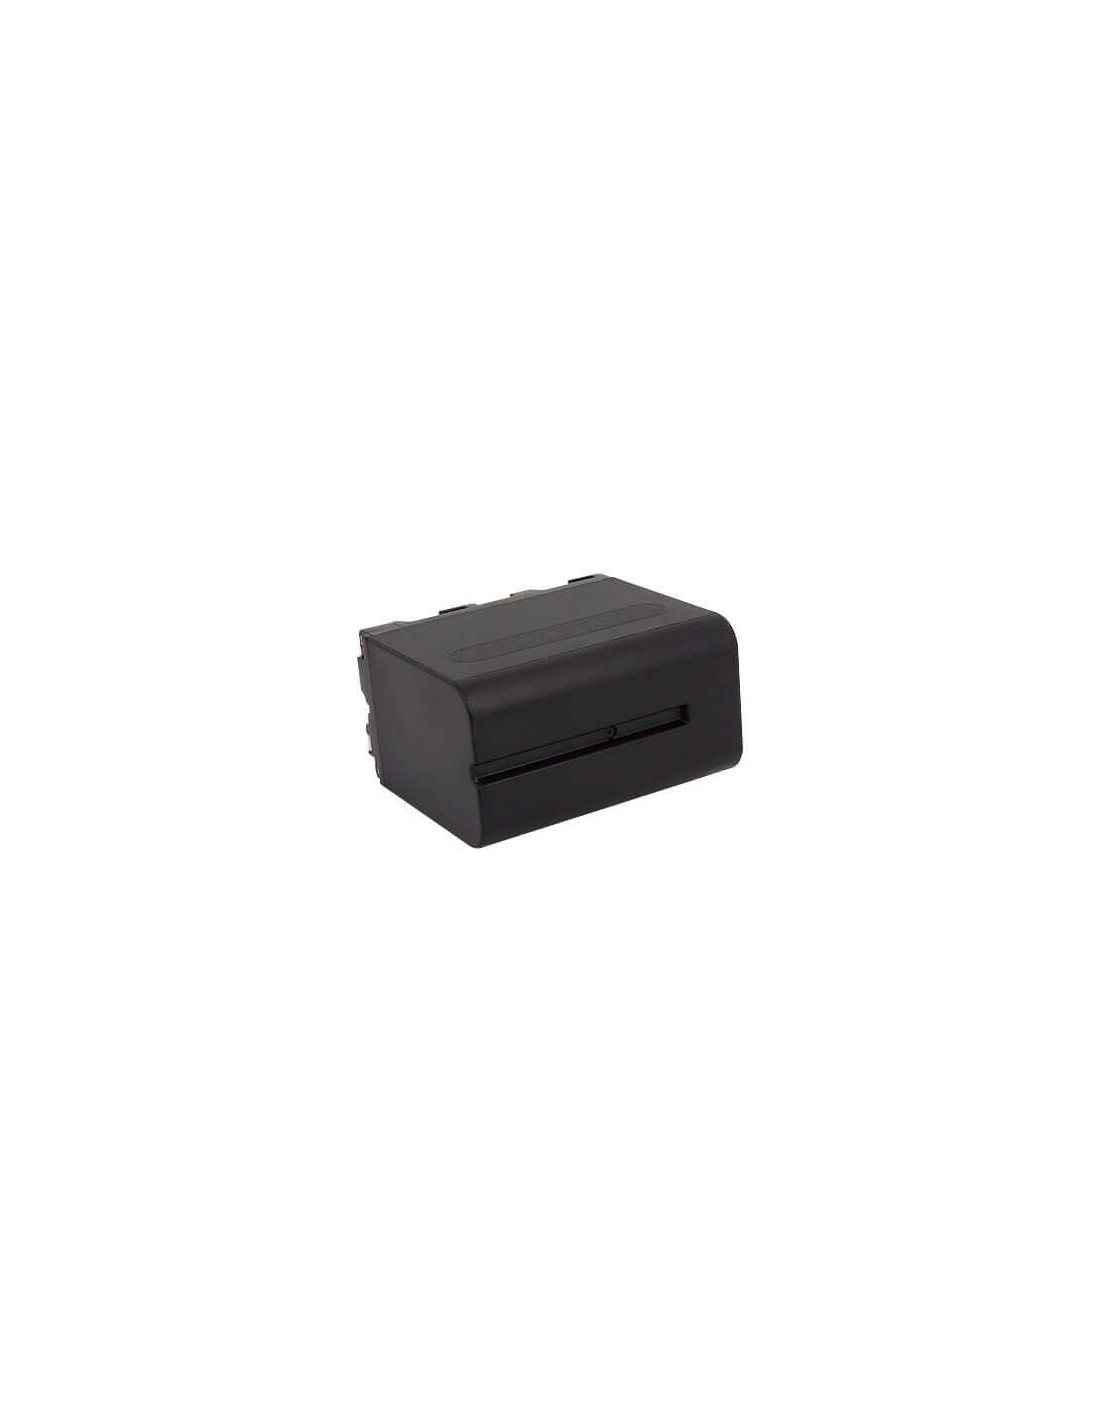 Battery for Sony, Ccd-rv100, Ccd-rv200, Ccd-sc5 7.4V, 10200mAh - 75.48Wh